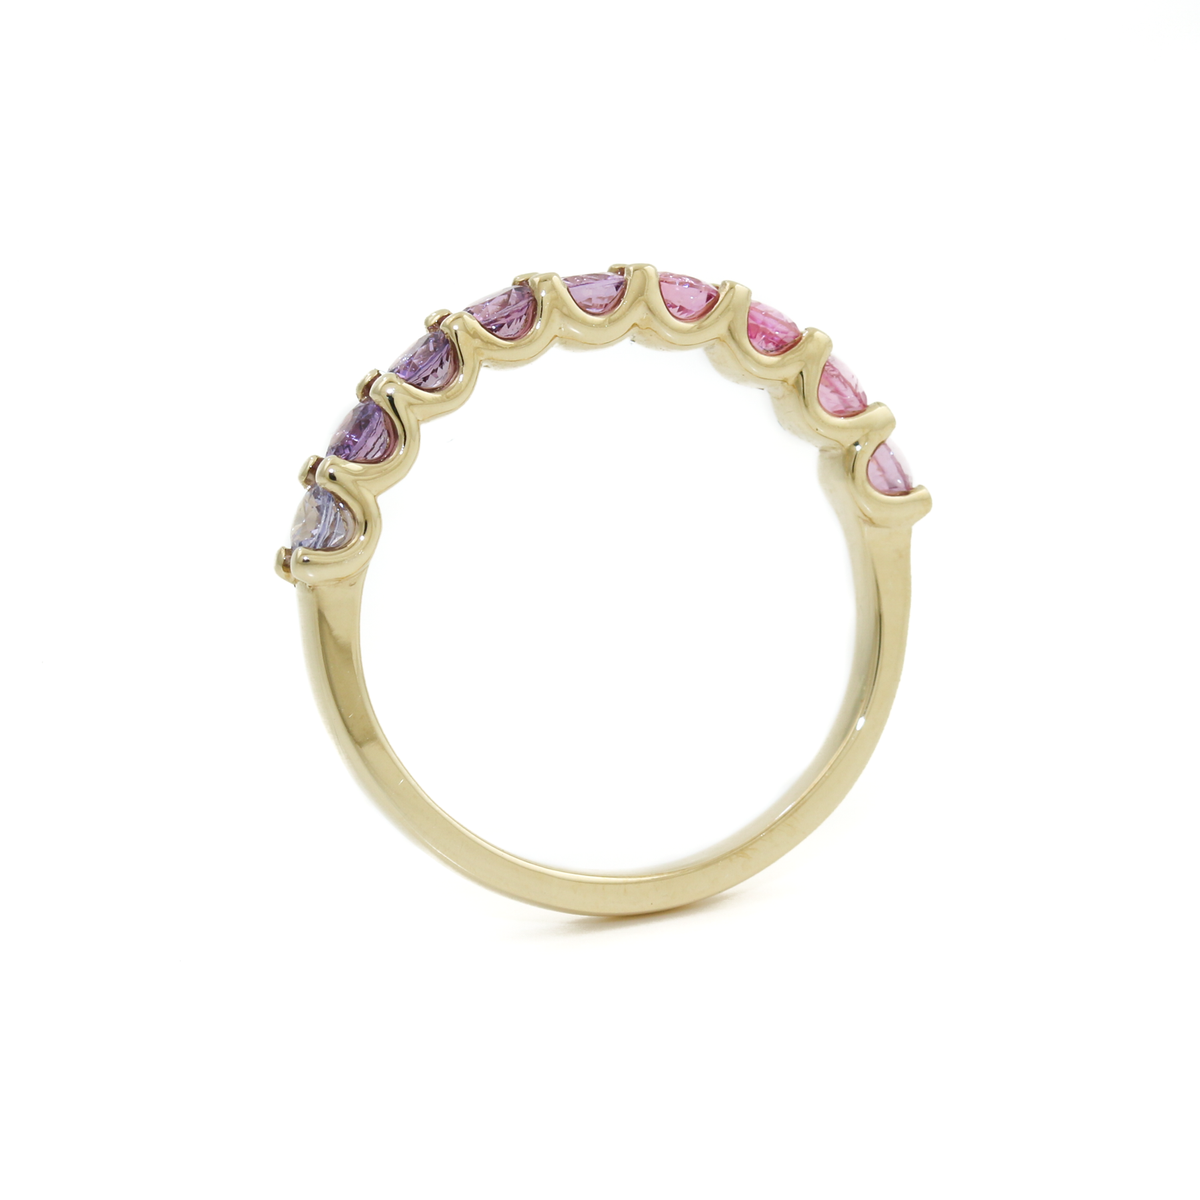 Indulge in the beauty of this Pink Sapphire band, skillfully crafted in 14K Yellow Gold.   These pinky/ purple sapphires have been expertly cut into alluring round shape, enhancing their brilliance and color saturation. The 14K yellow gold band provides a radiant and complementary setting, accentuating the sapphires' natural beauty in a bead setting. 